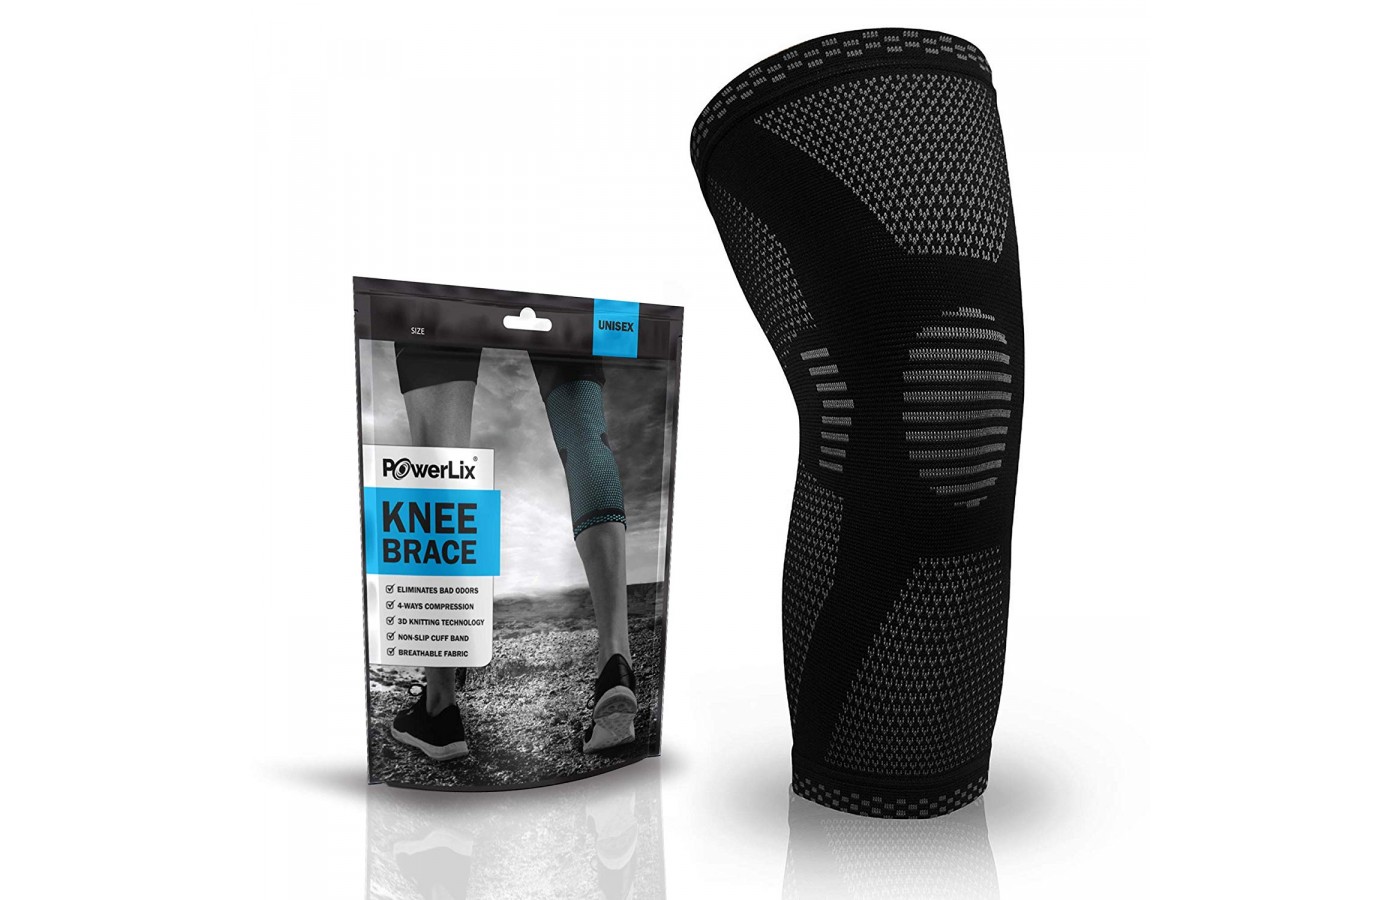 The ergonomic design of the PowerLix Compression Knee Sleeve is visible here.